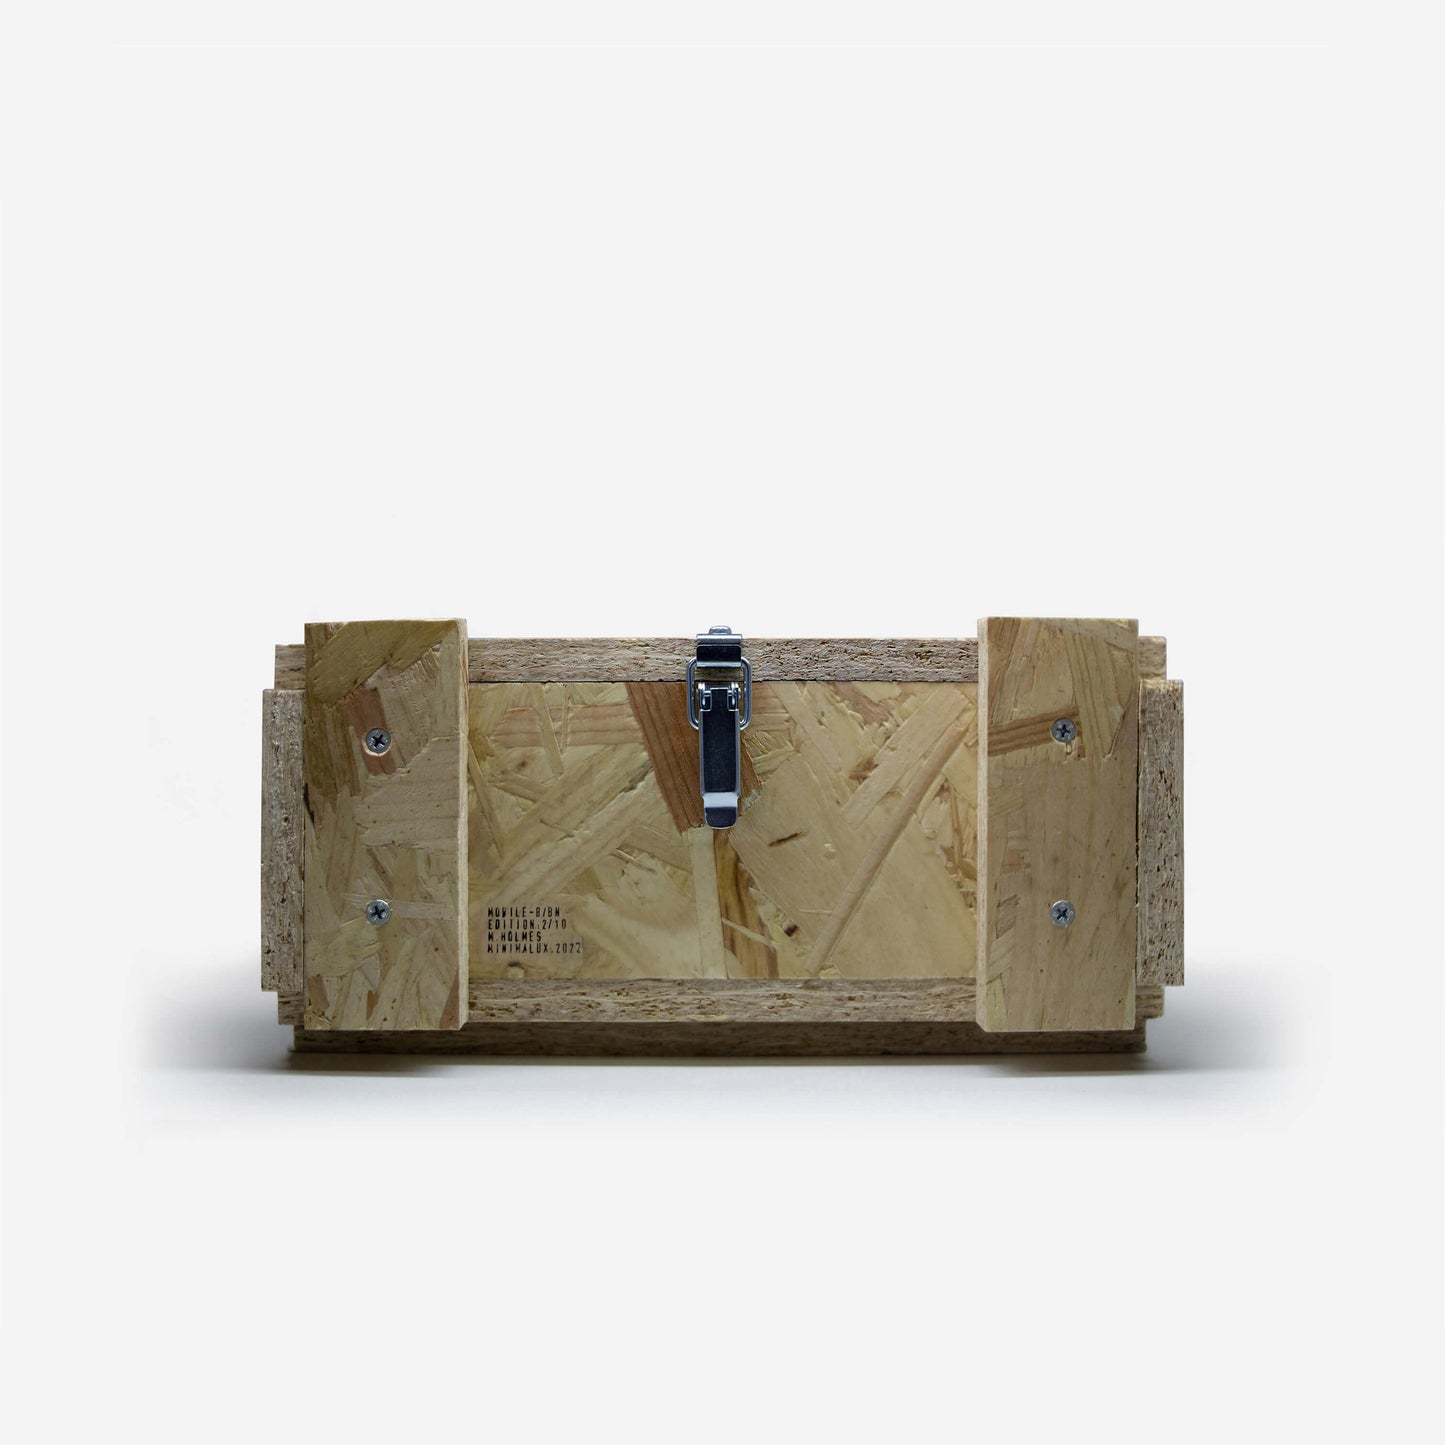 Crate for Mobile - Minimalux